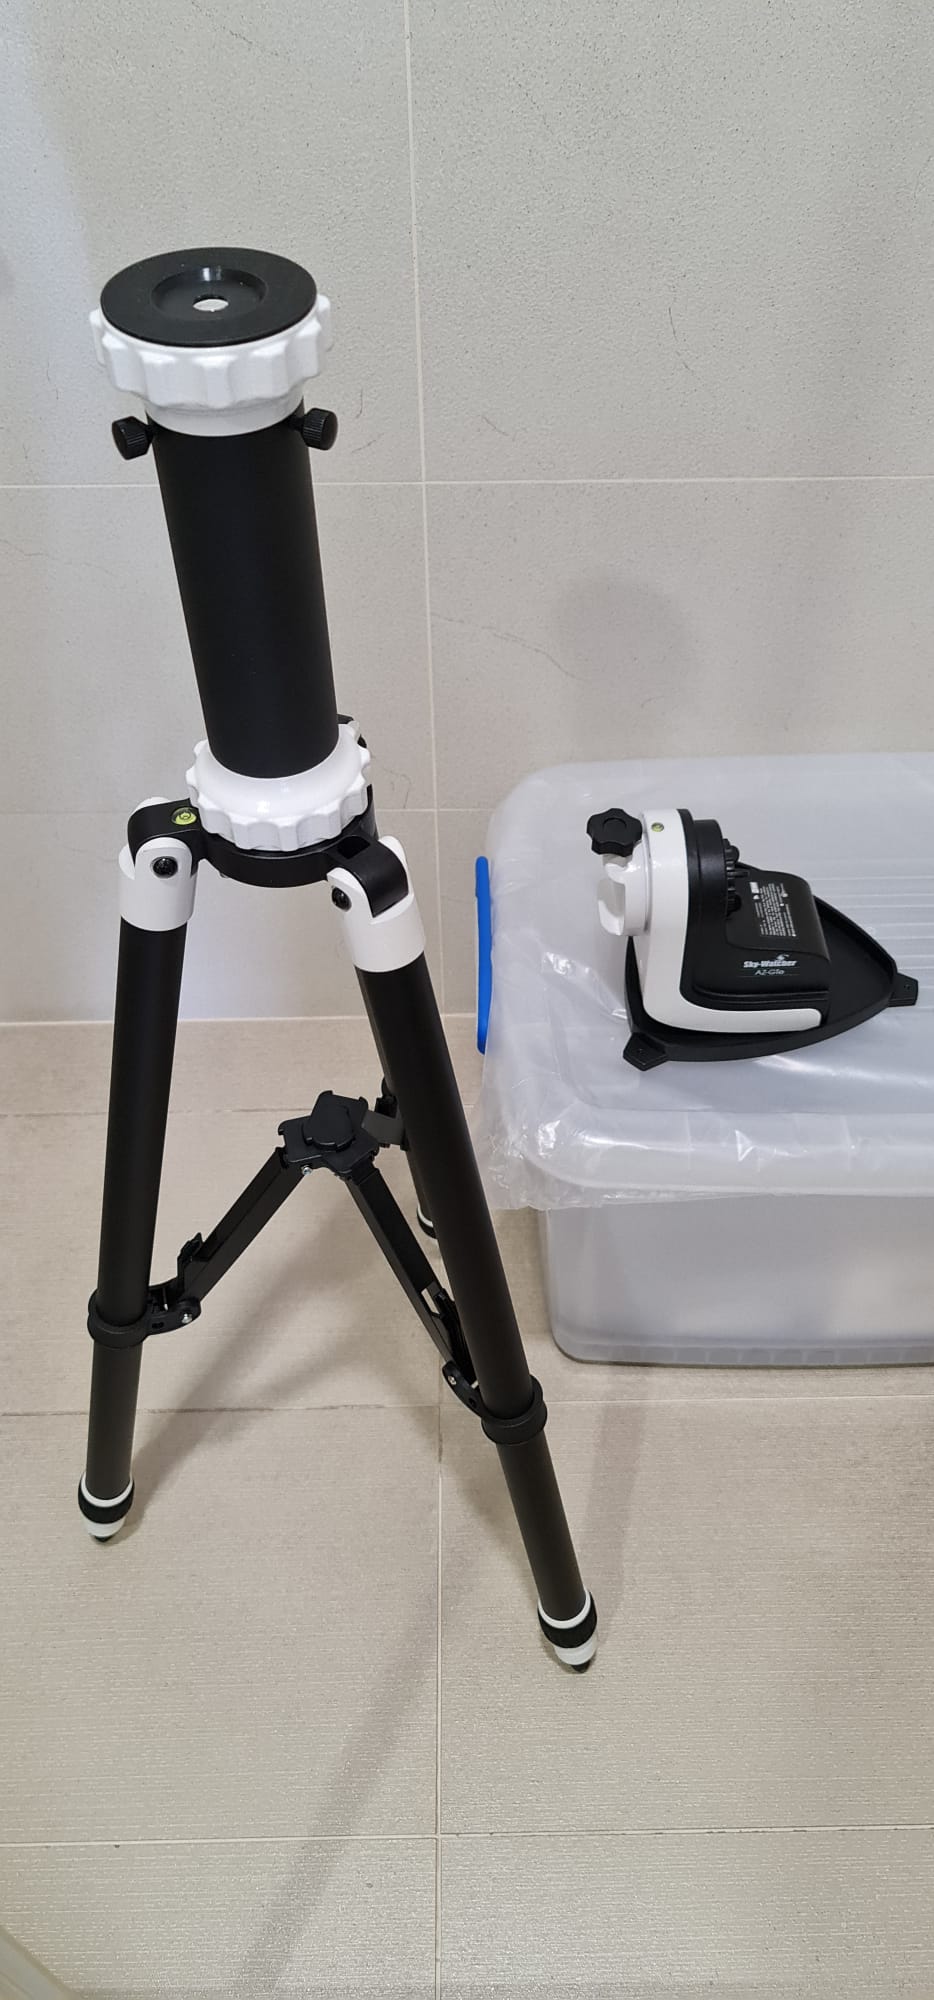 GTE mount and tripod